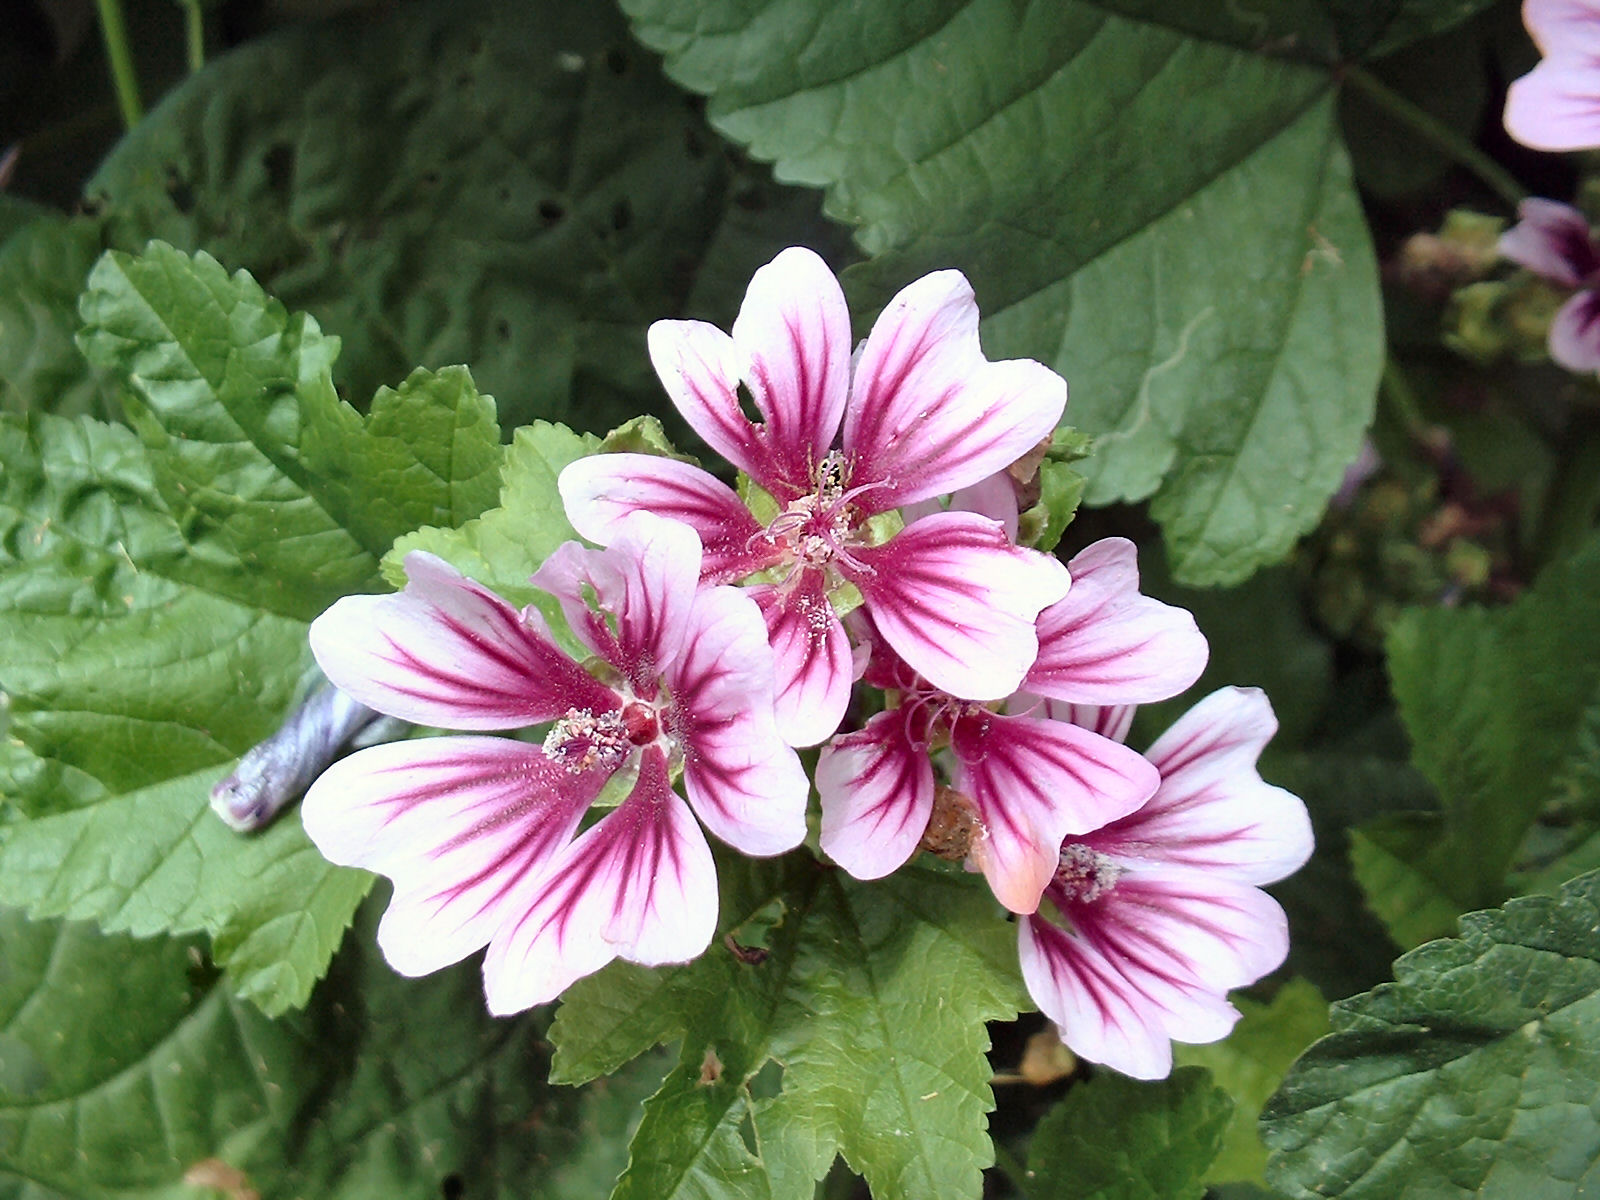 pink flowers surrounded by green leaves in the daytime